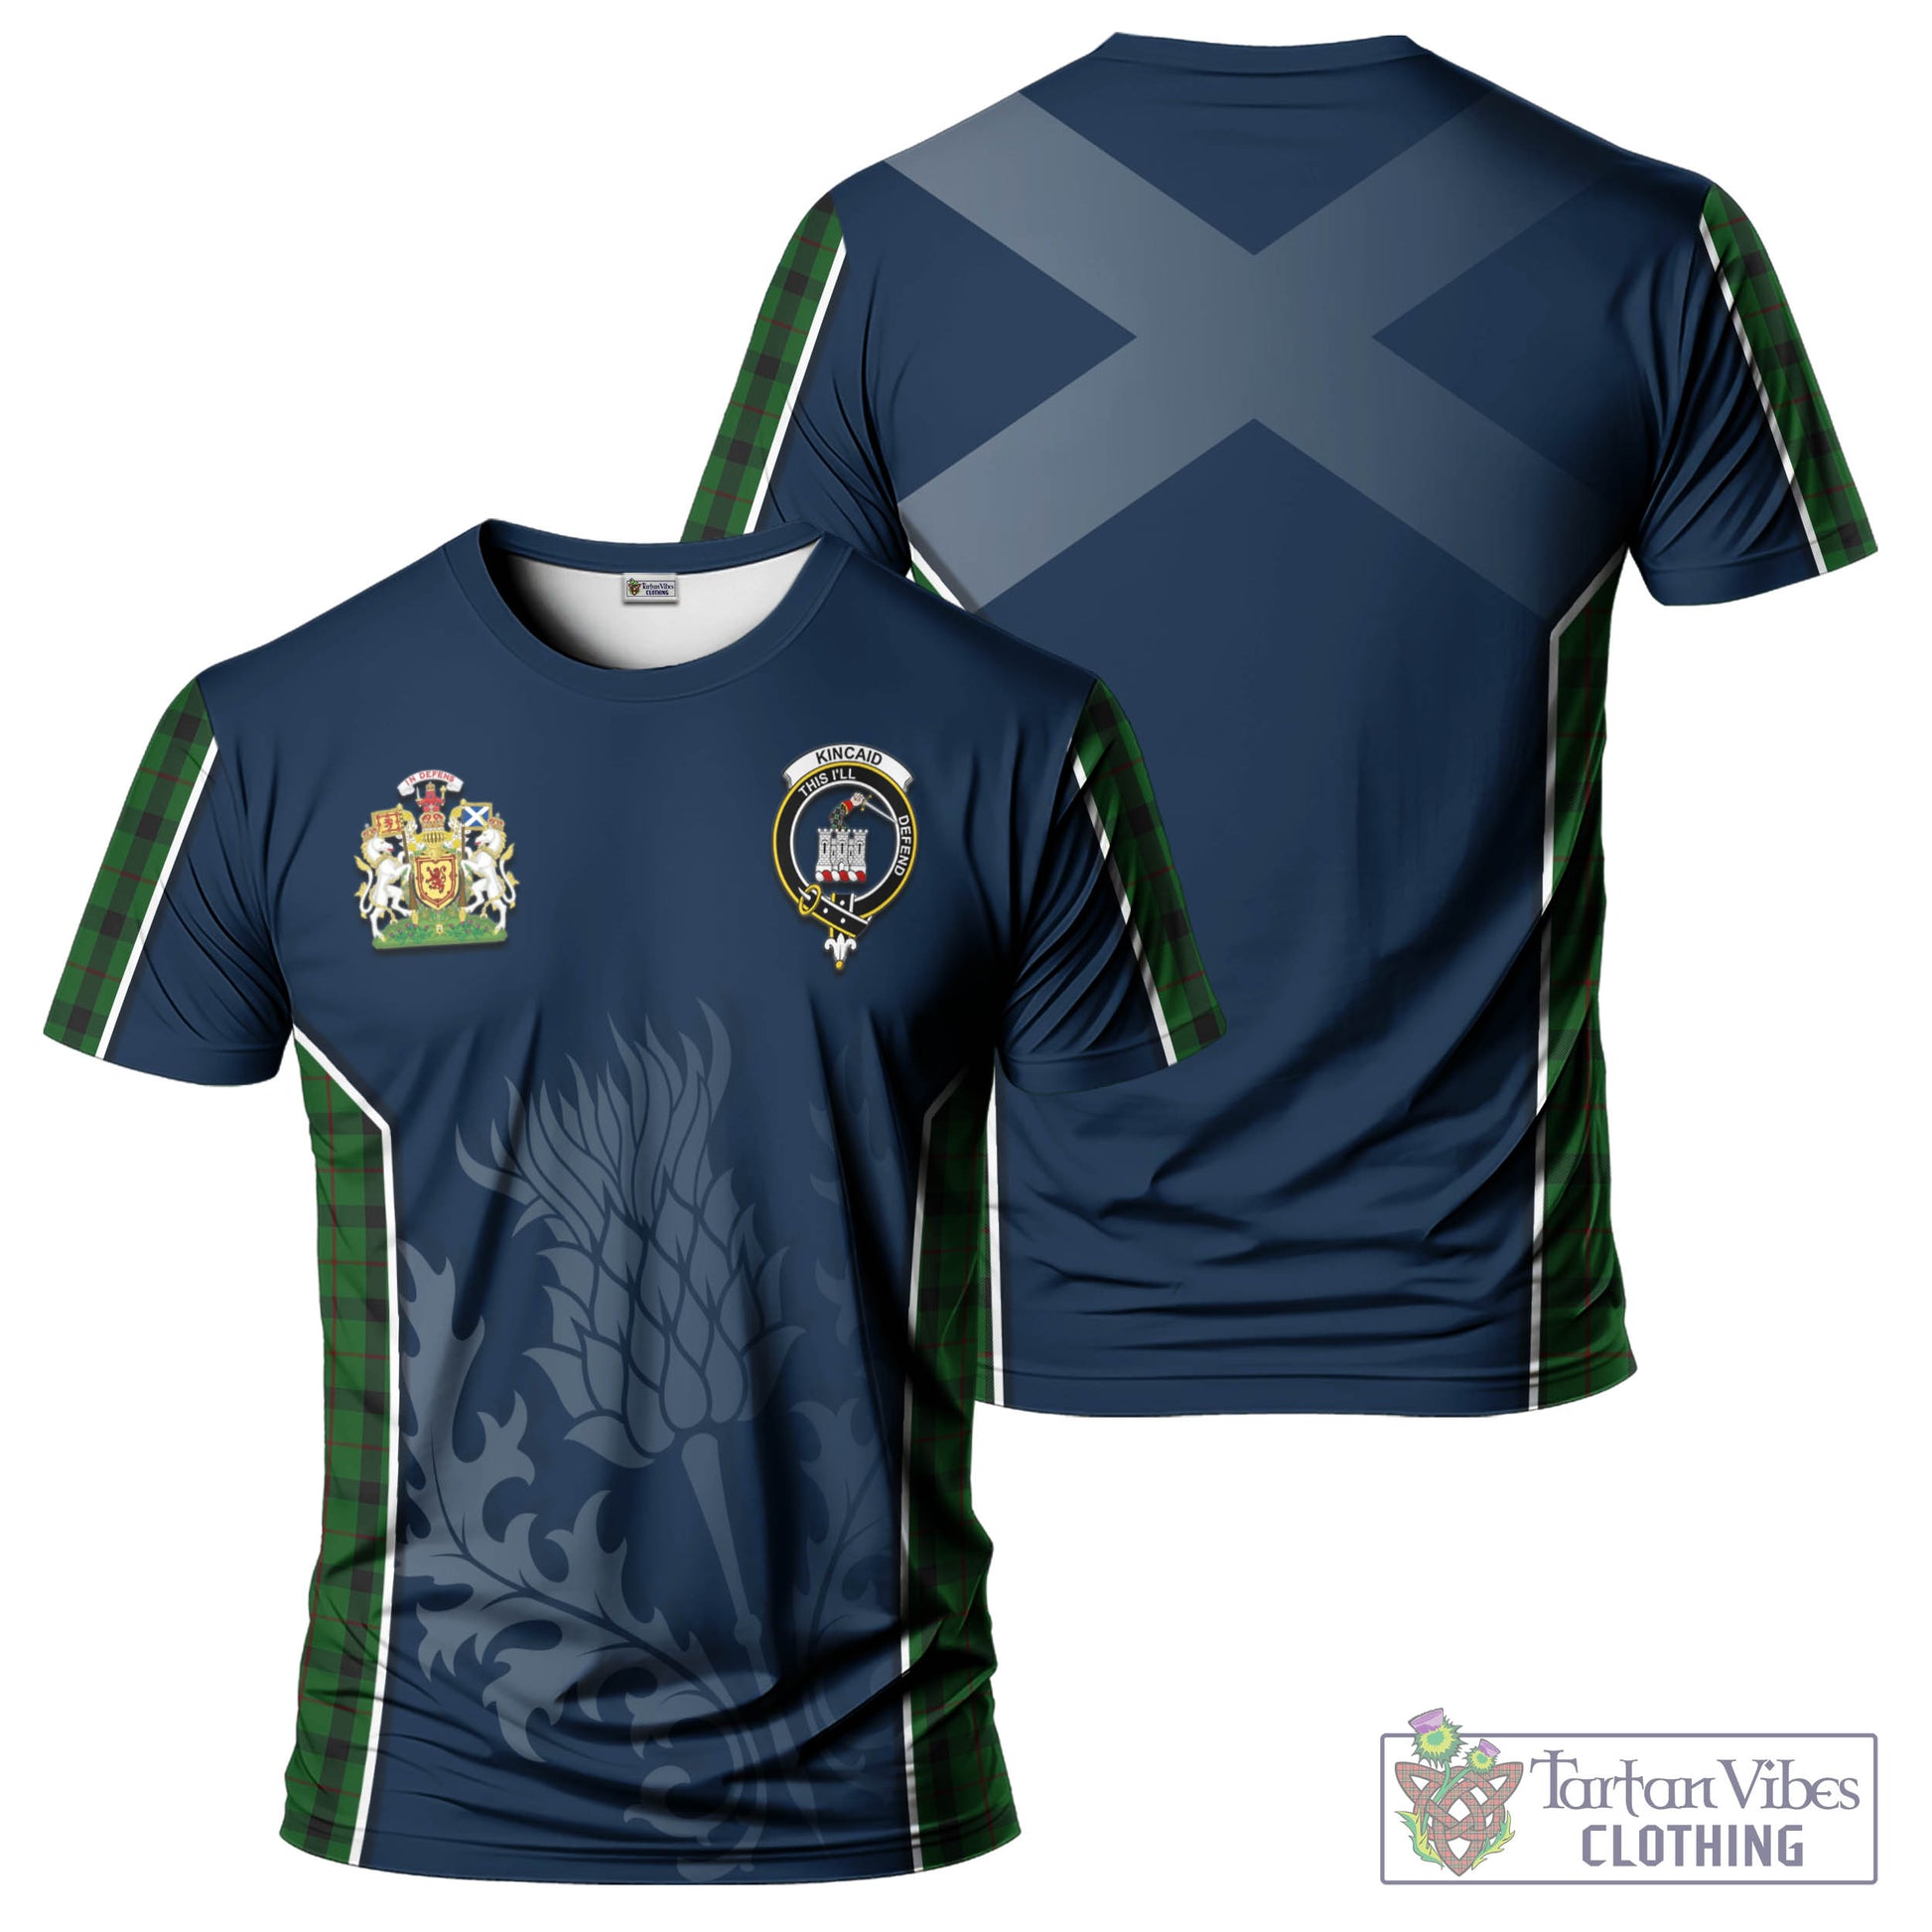 Tartan Vibes Clothing Kincaid Tartan T-Shirt with Family Crest and Scottish Thistle Vibes Sport Style